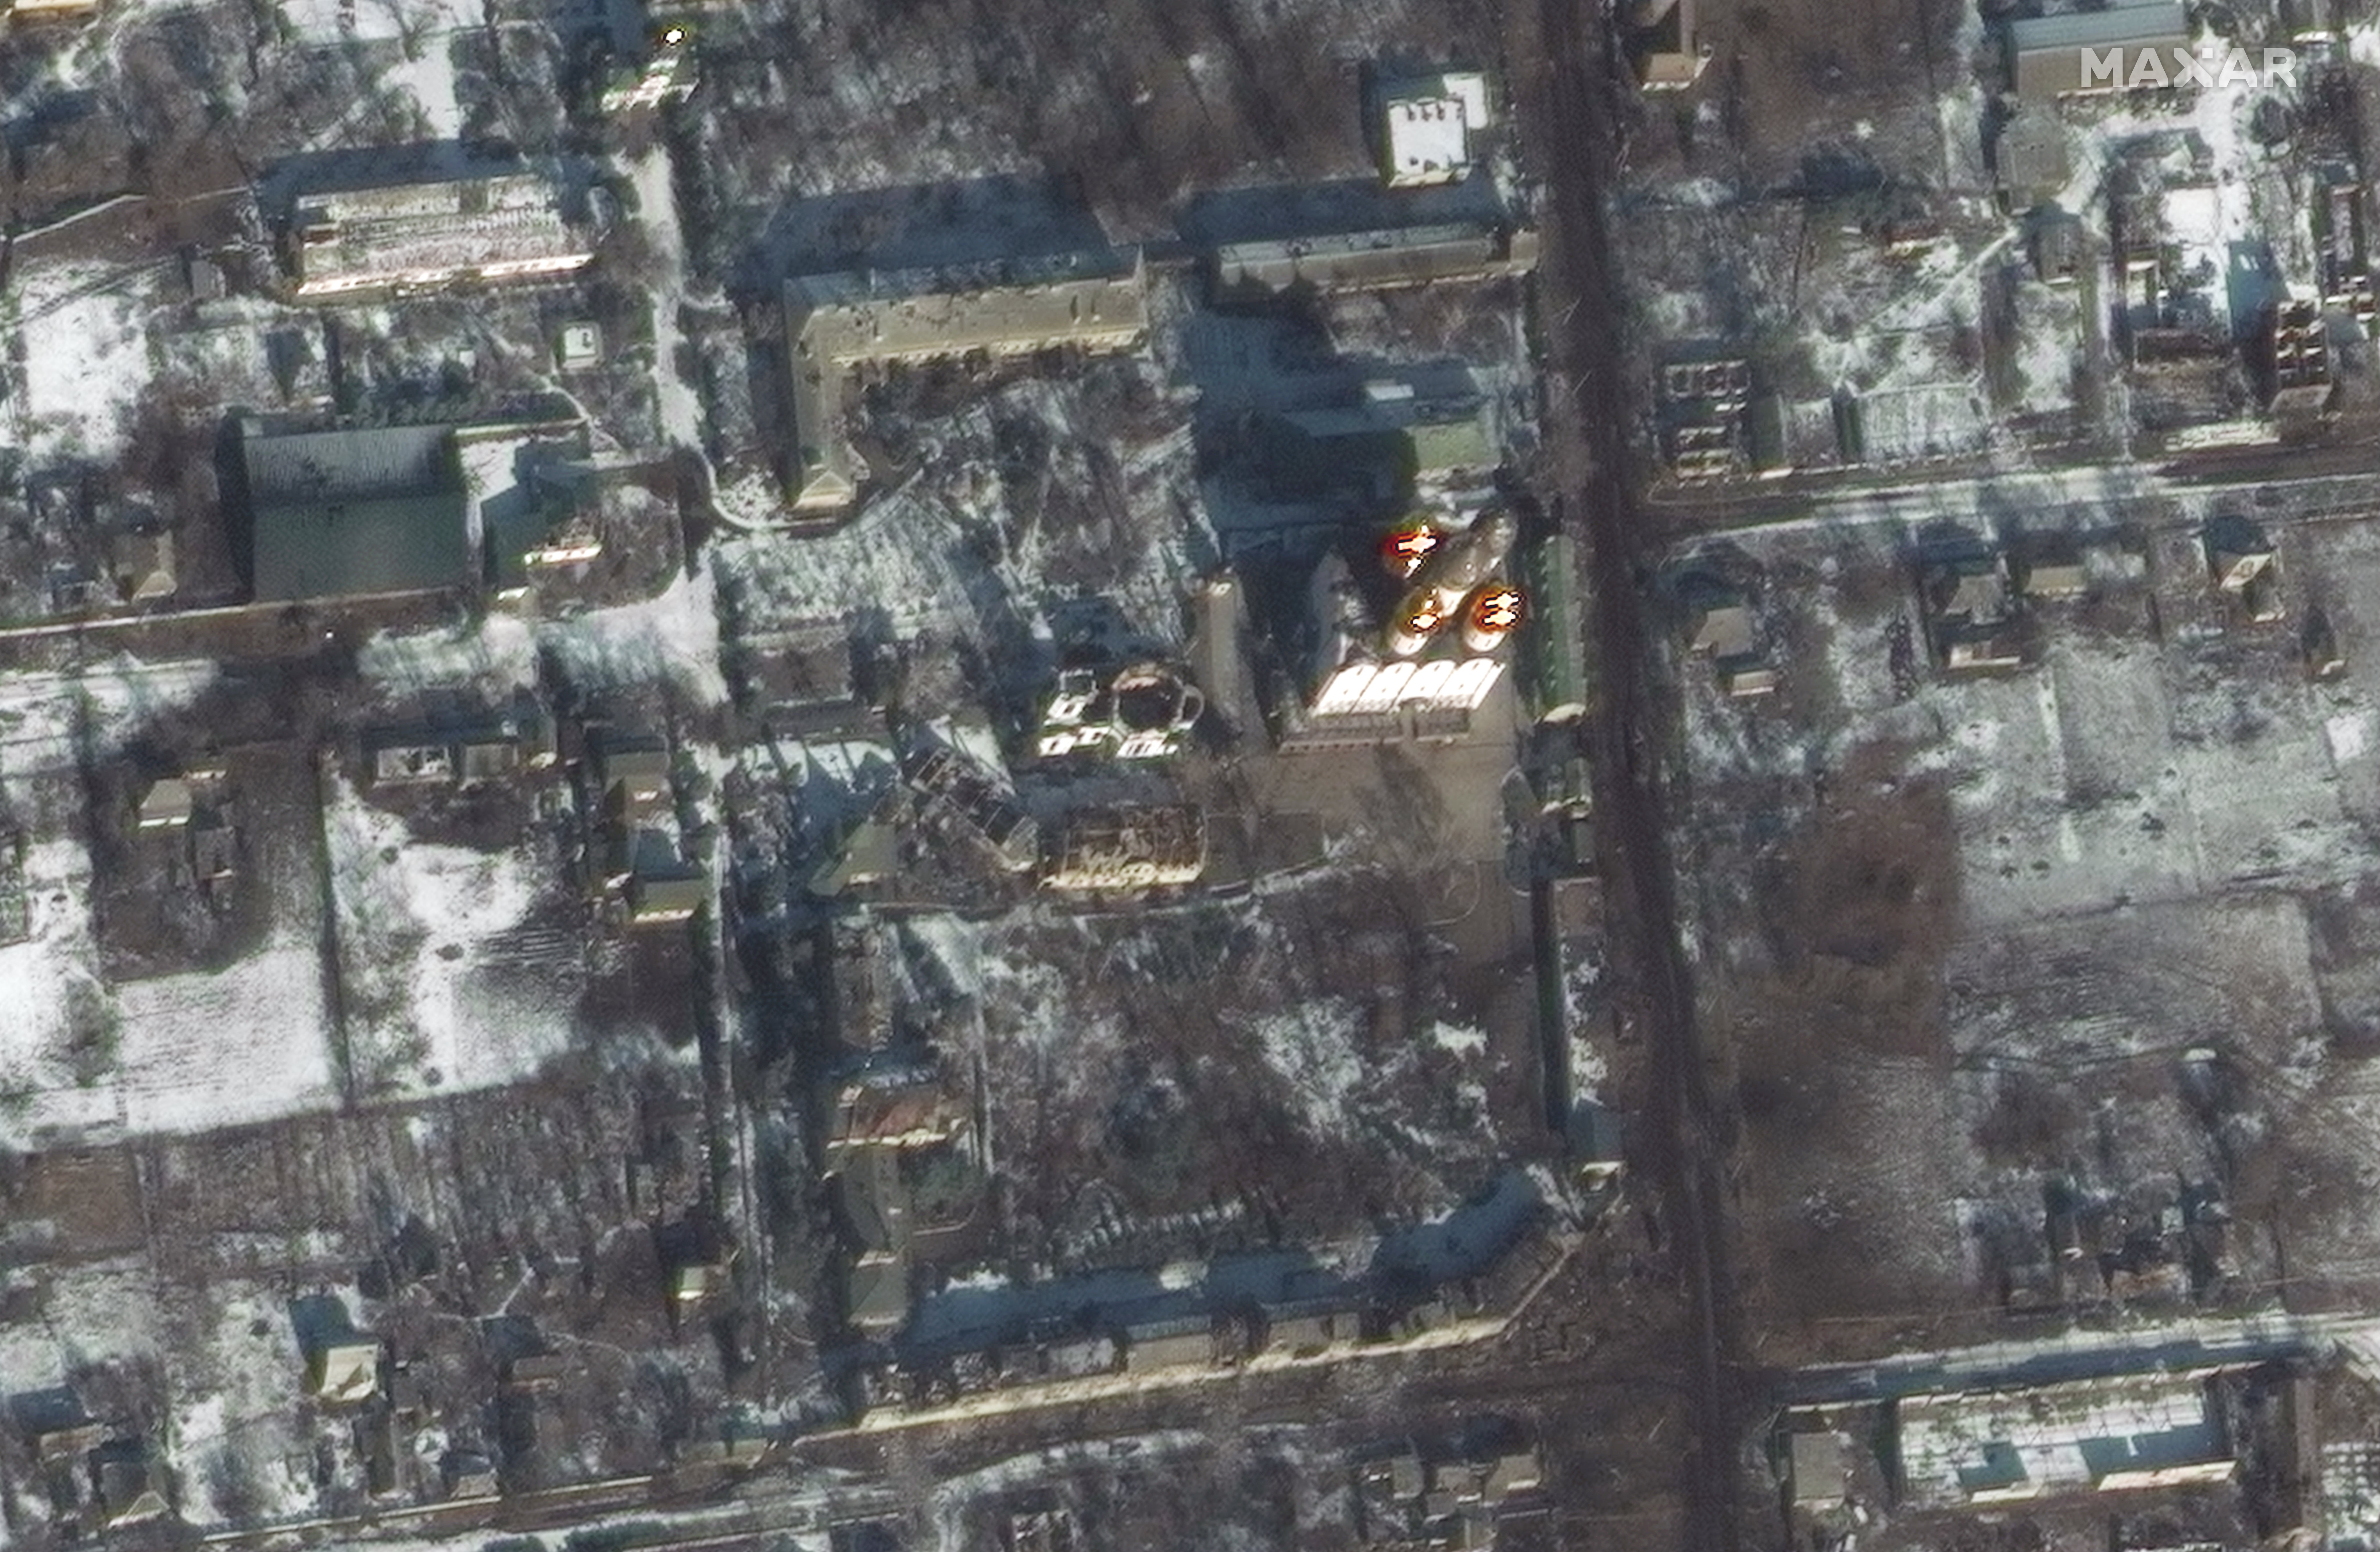 Image shows damage to the monastery and surrounding areas after recent intense fighting (picture captured 10 February 2023)